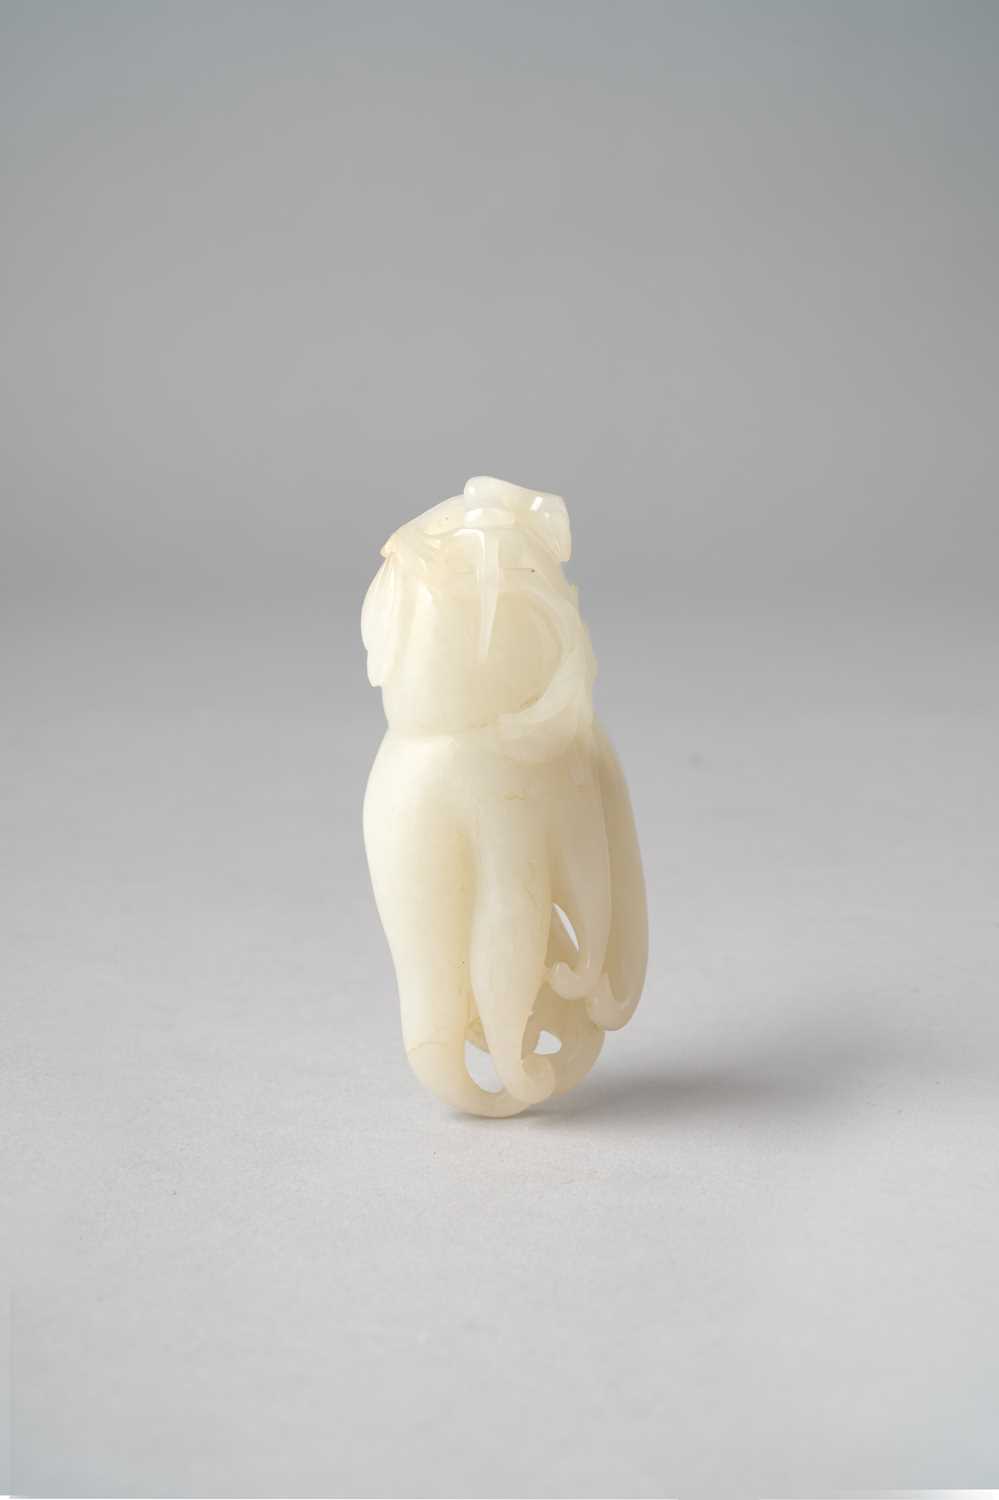 A CHINESE WHITE JADE CARVING OF A FINGER CITRON QING DYNASTY OR LATER Carved as a large finger